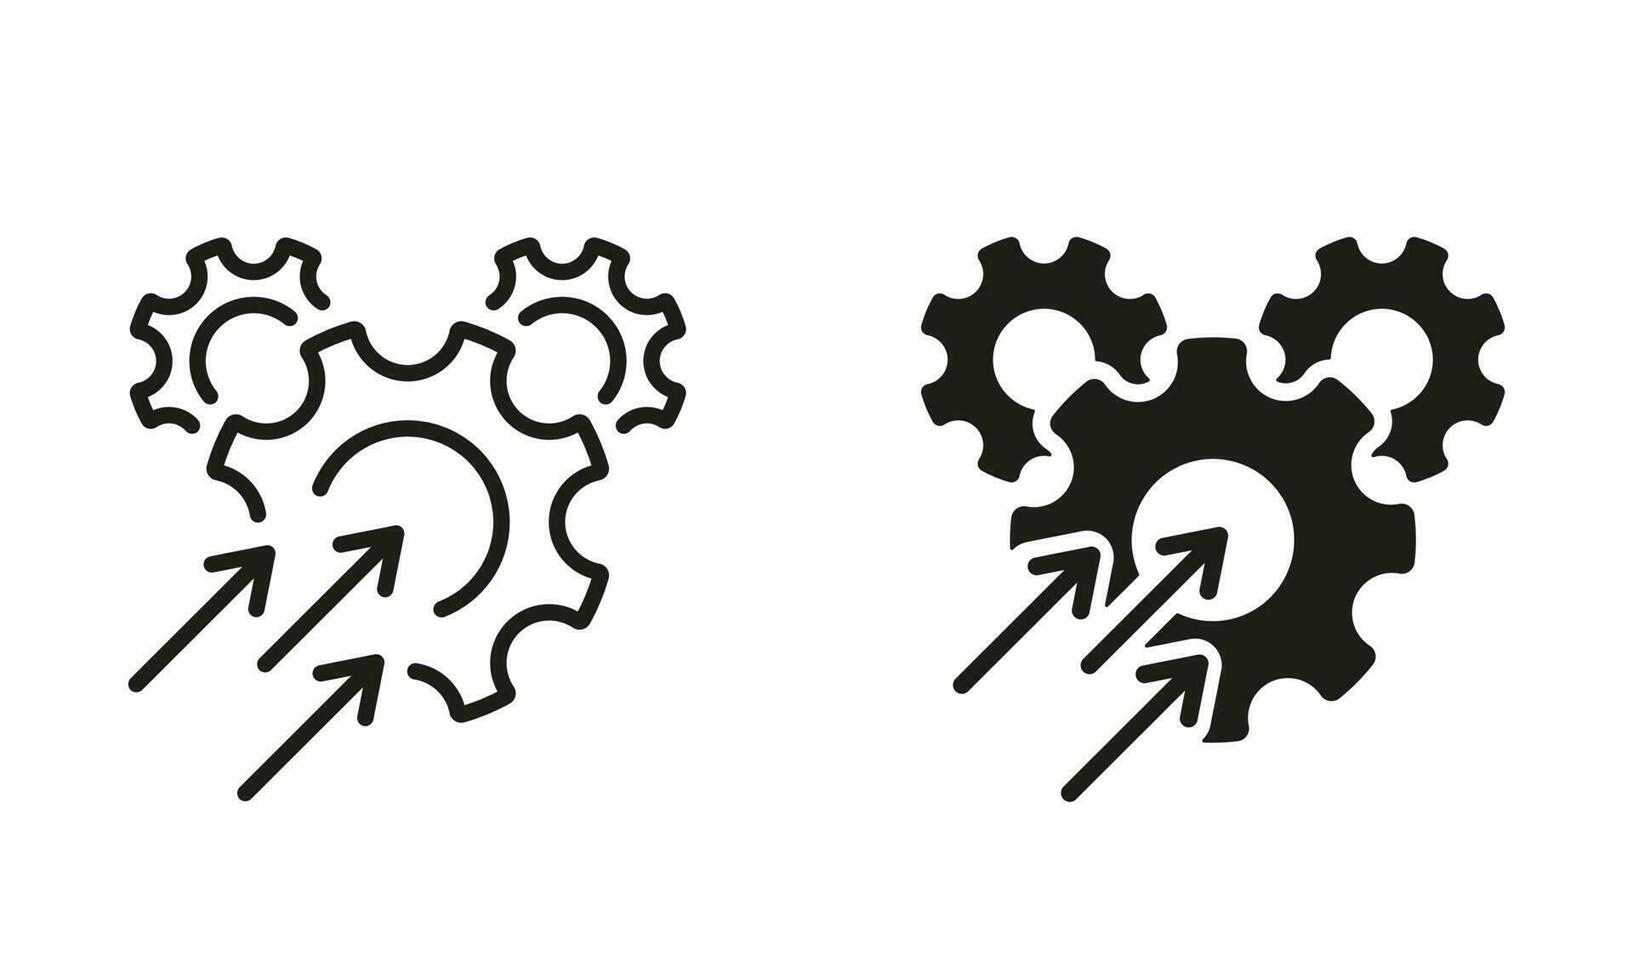 Gear with Increase Arrow Pictogram. Productivity Industry Process Line and Silhouette Icon Set. Operational Production Growth Symbol Collection. Optimize Business Sign. Isolated Vector Illustration.